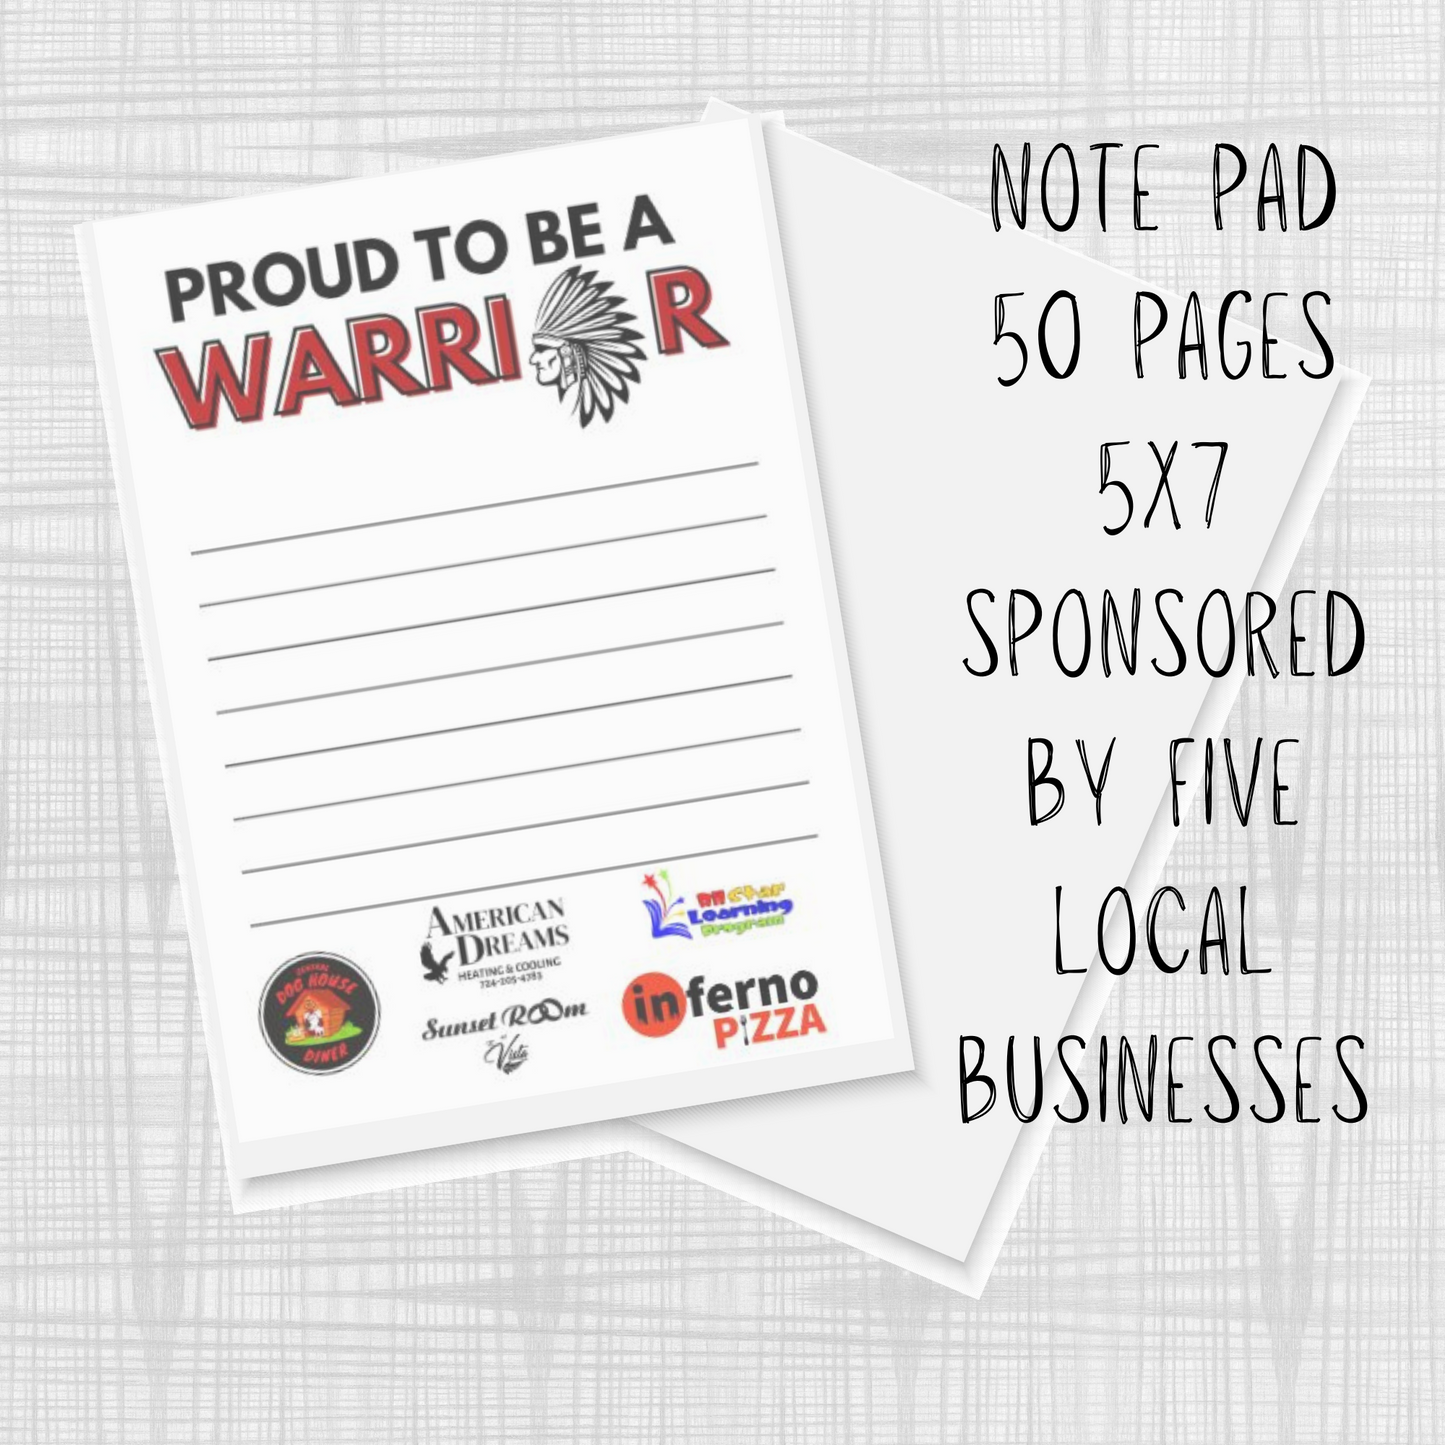 Proud To Be A Warrior Fundraiser NotePad